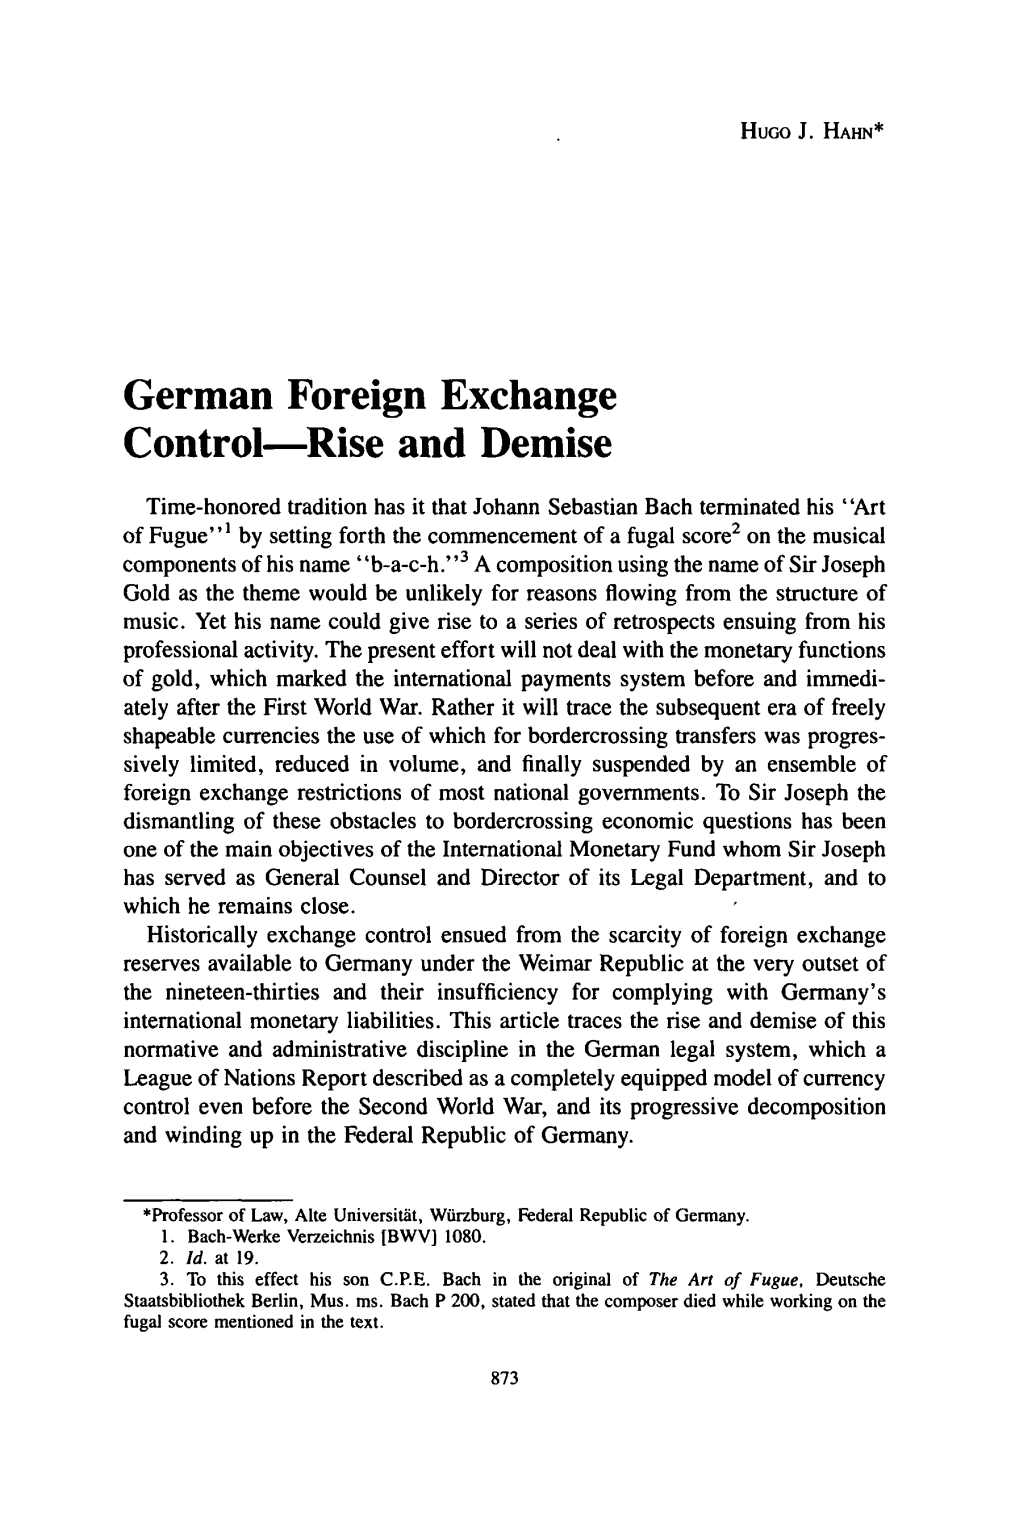 German Foreign Exchange Control-Rise and Demise